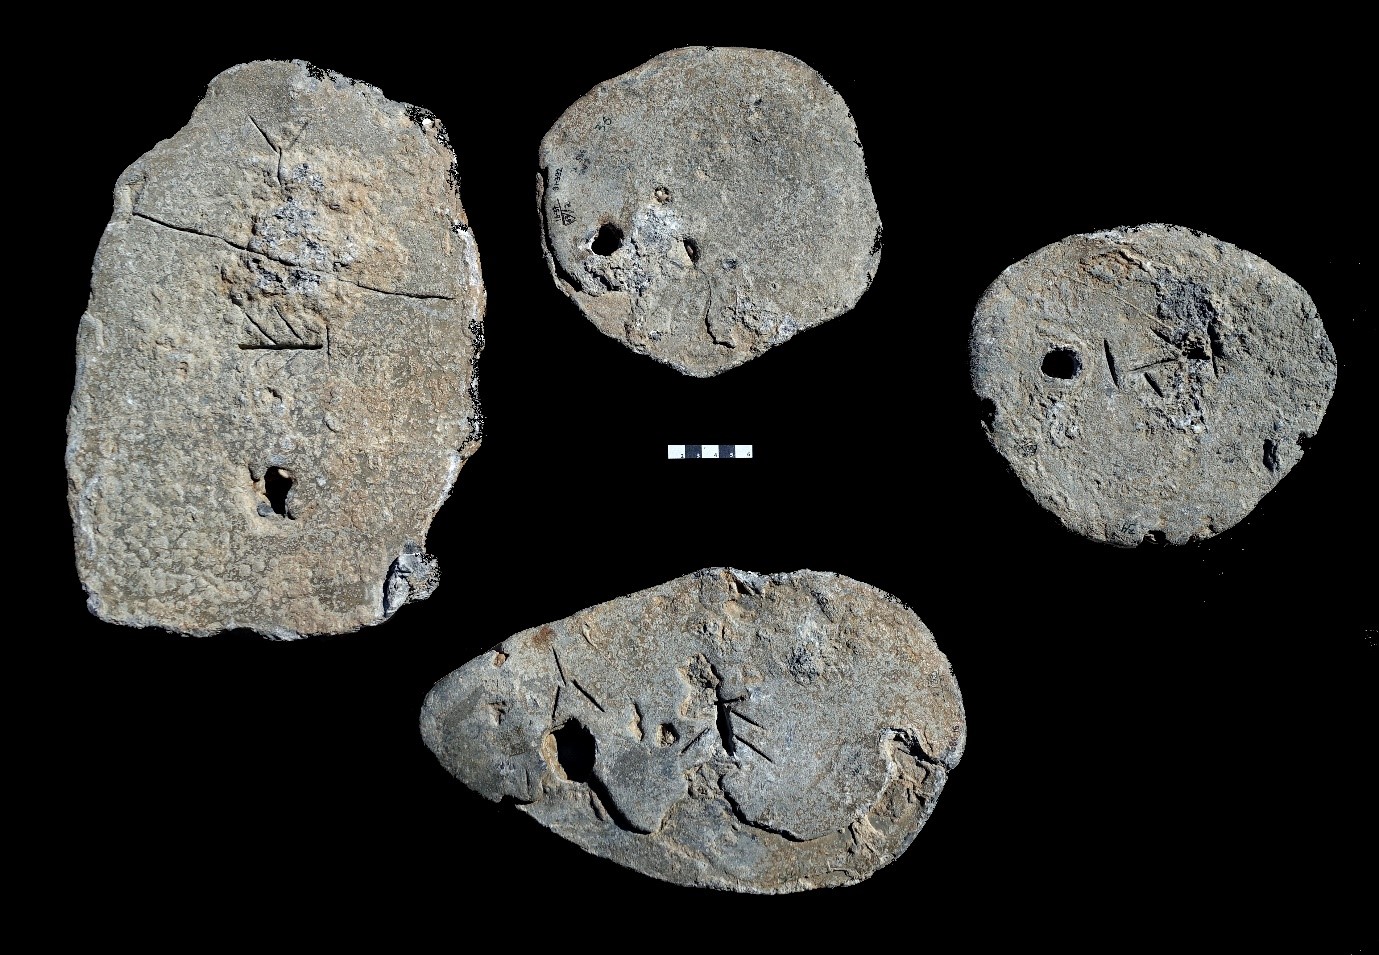 New analysis of 3,200-year-old lead ingots sinks theories about Bronze Age  trade